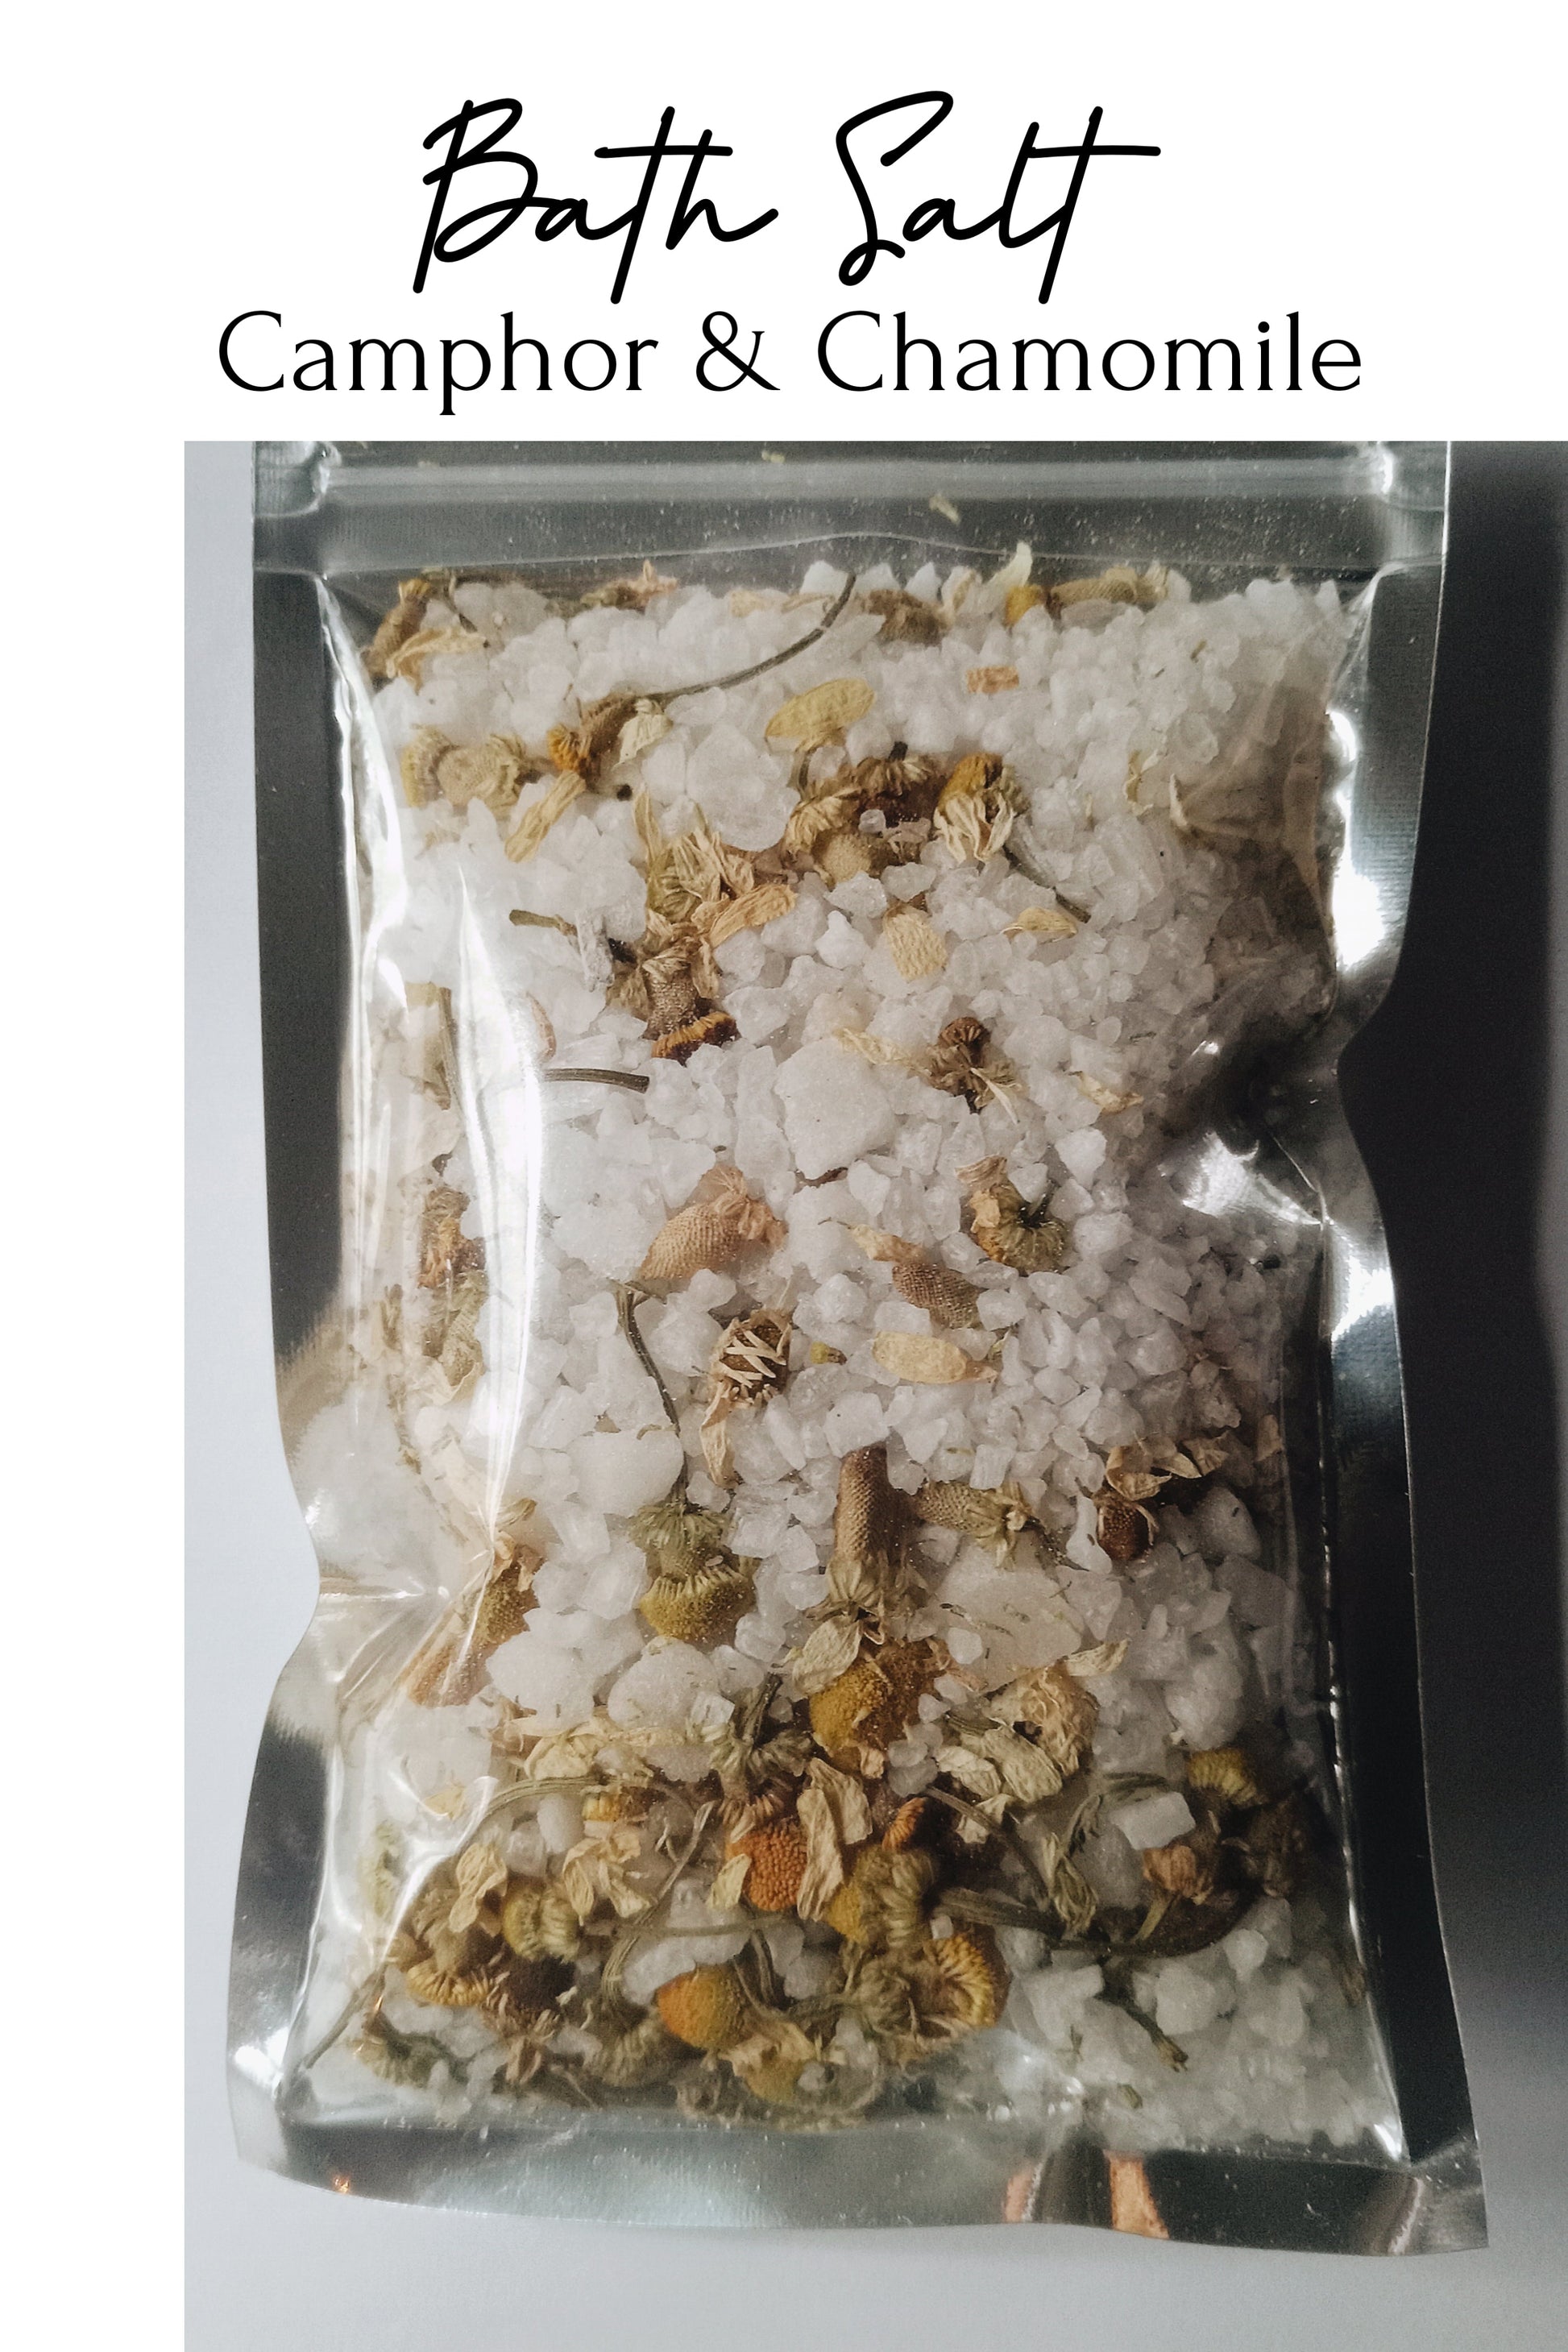  Camphor & Chamomile Bath Salt -  available at Amazing Creations Products . Grab yours for $10 today!